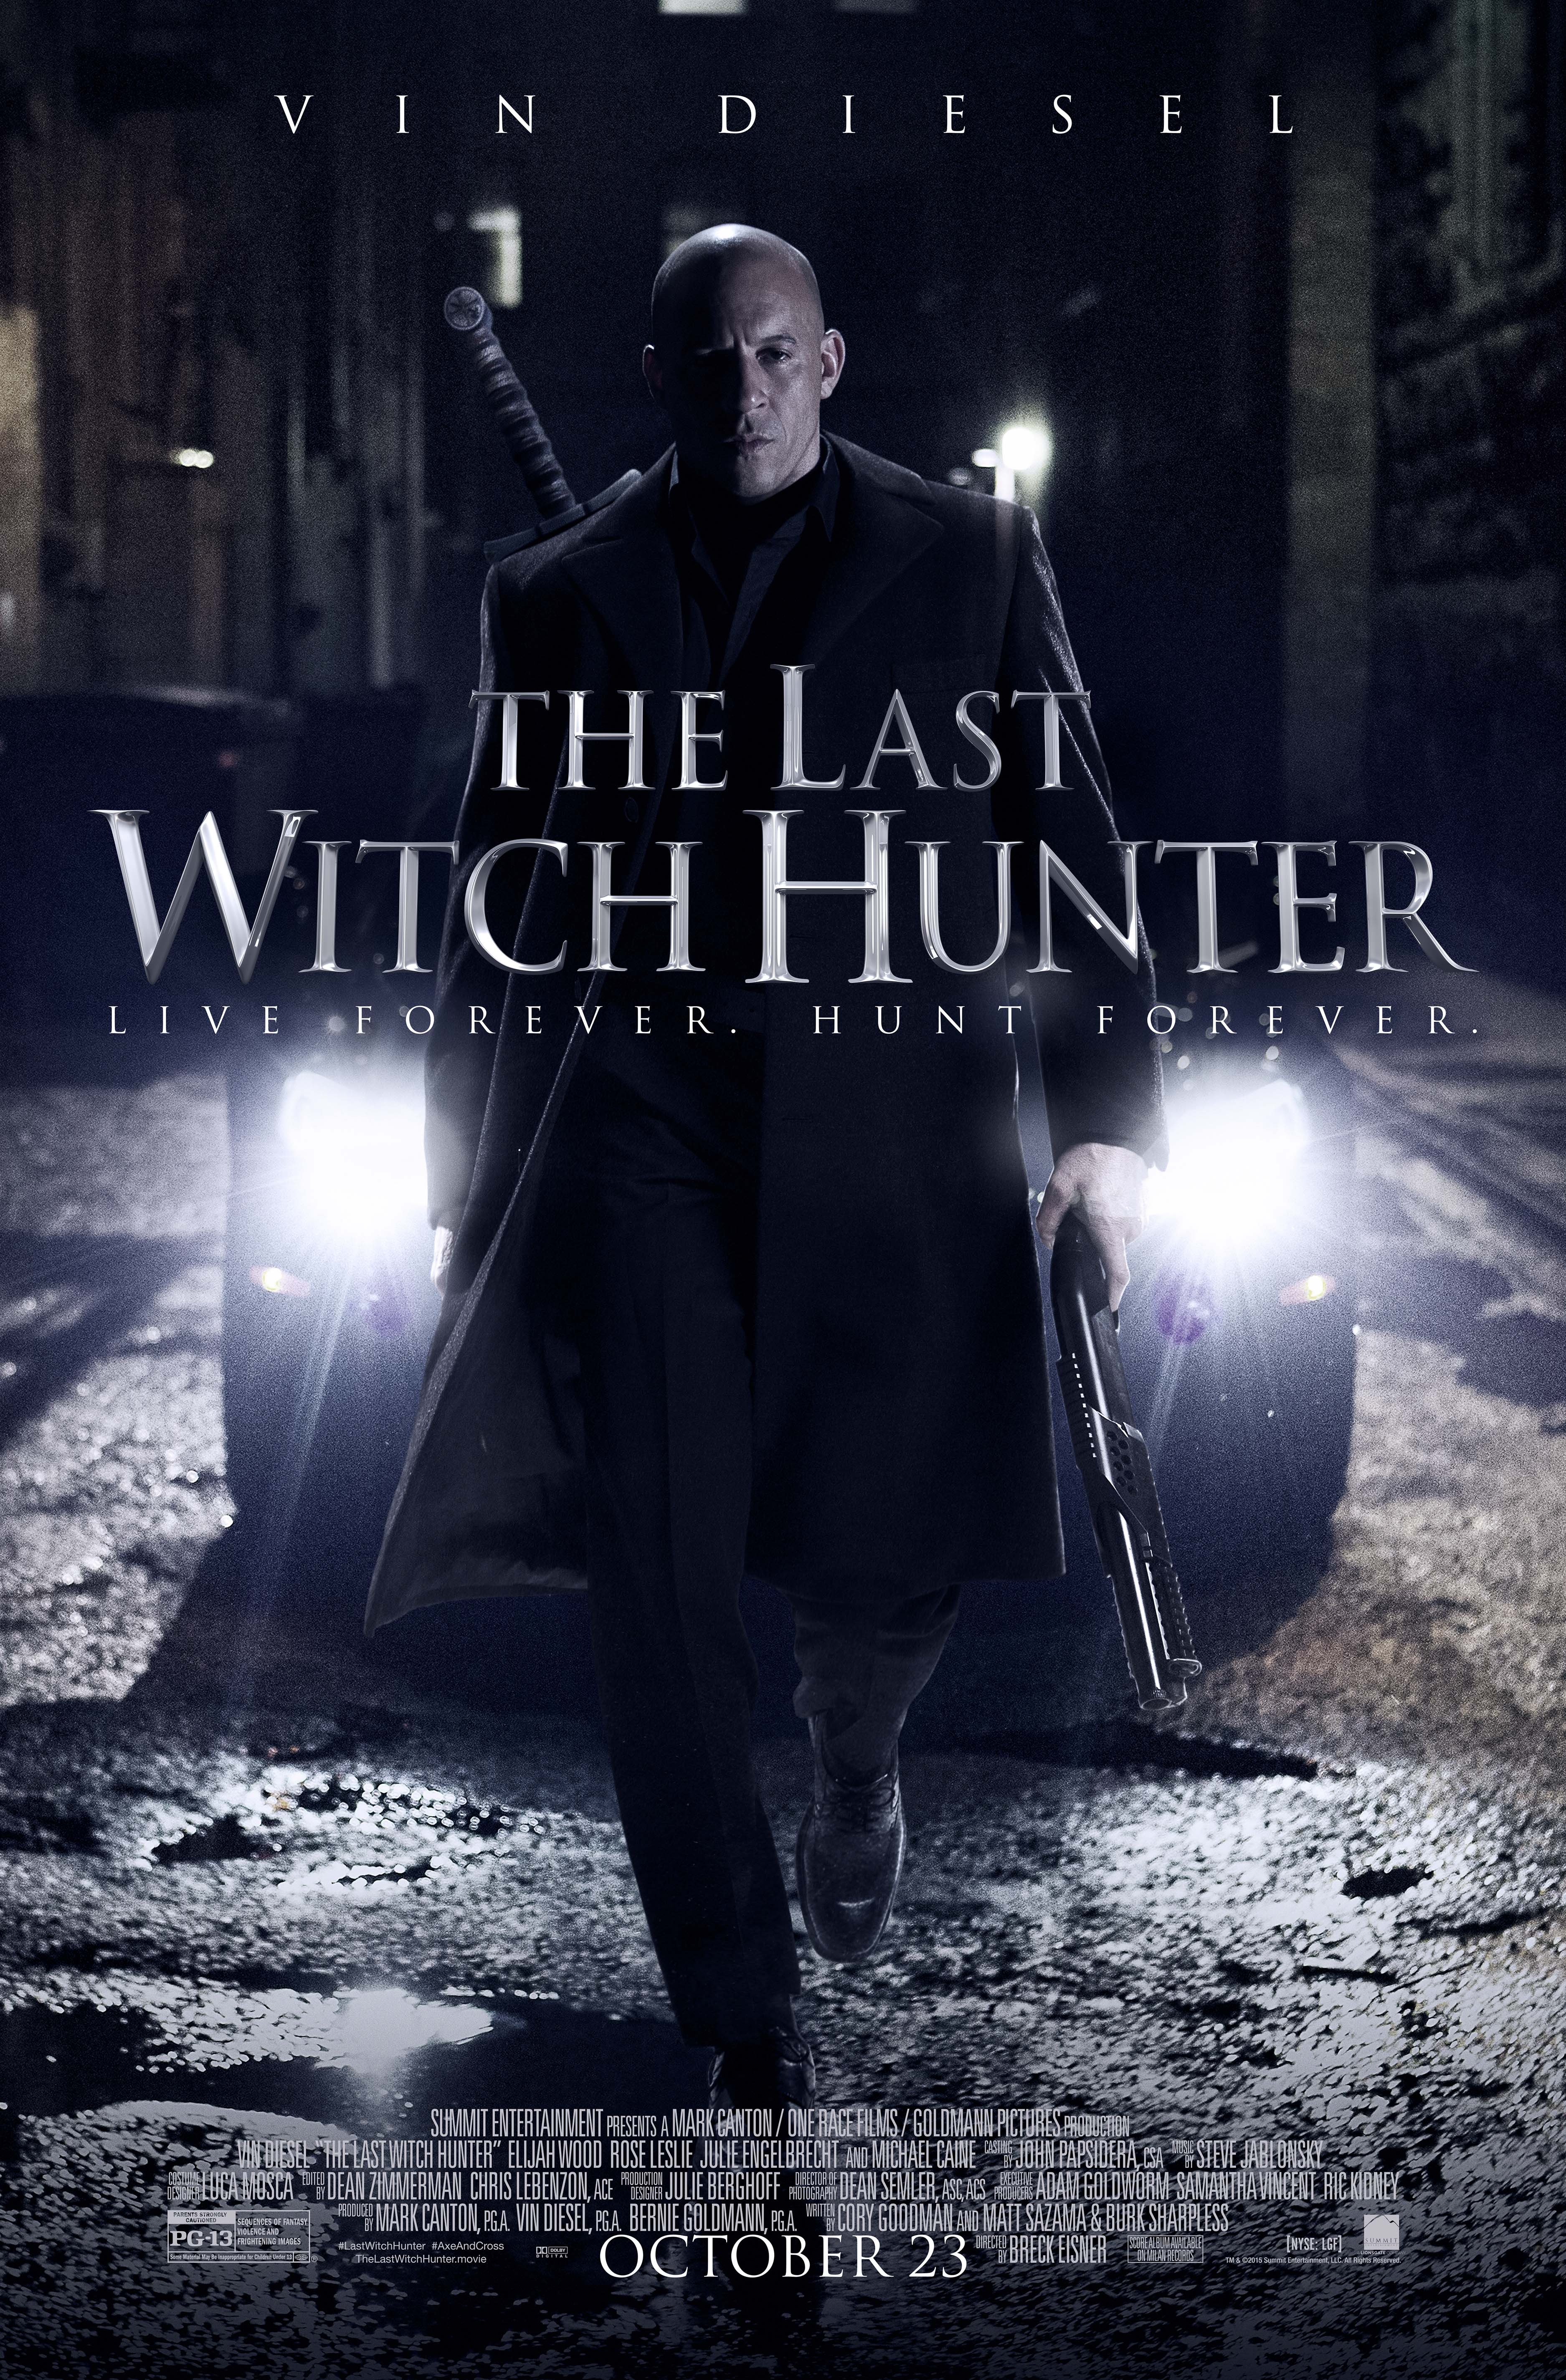 the last witch hunter 2 release date in india